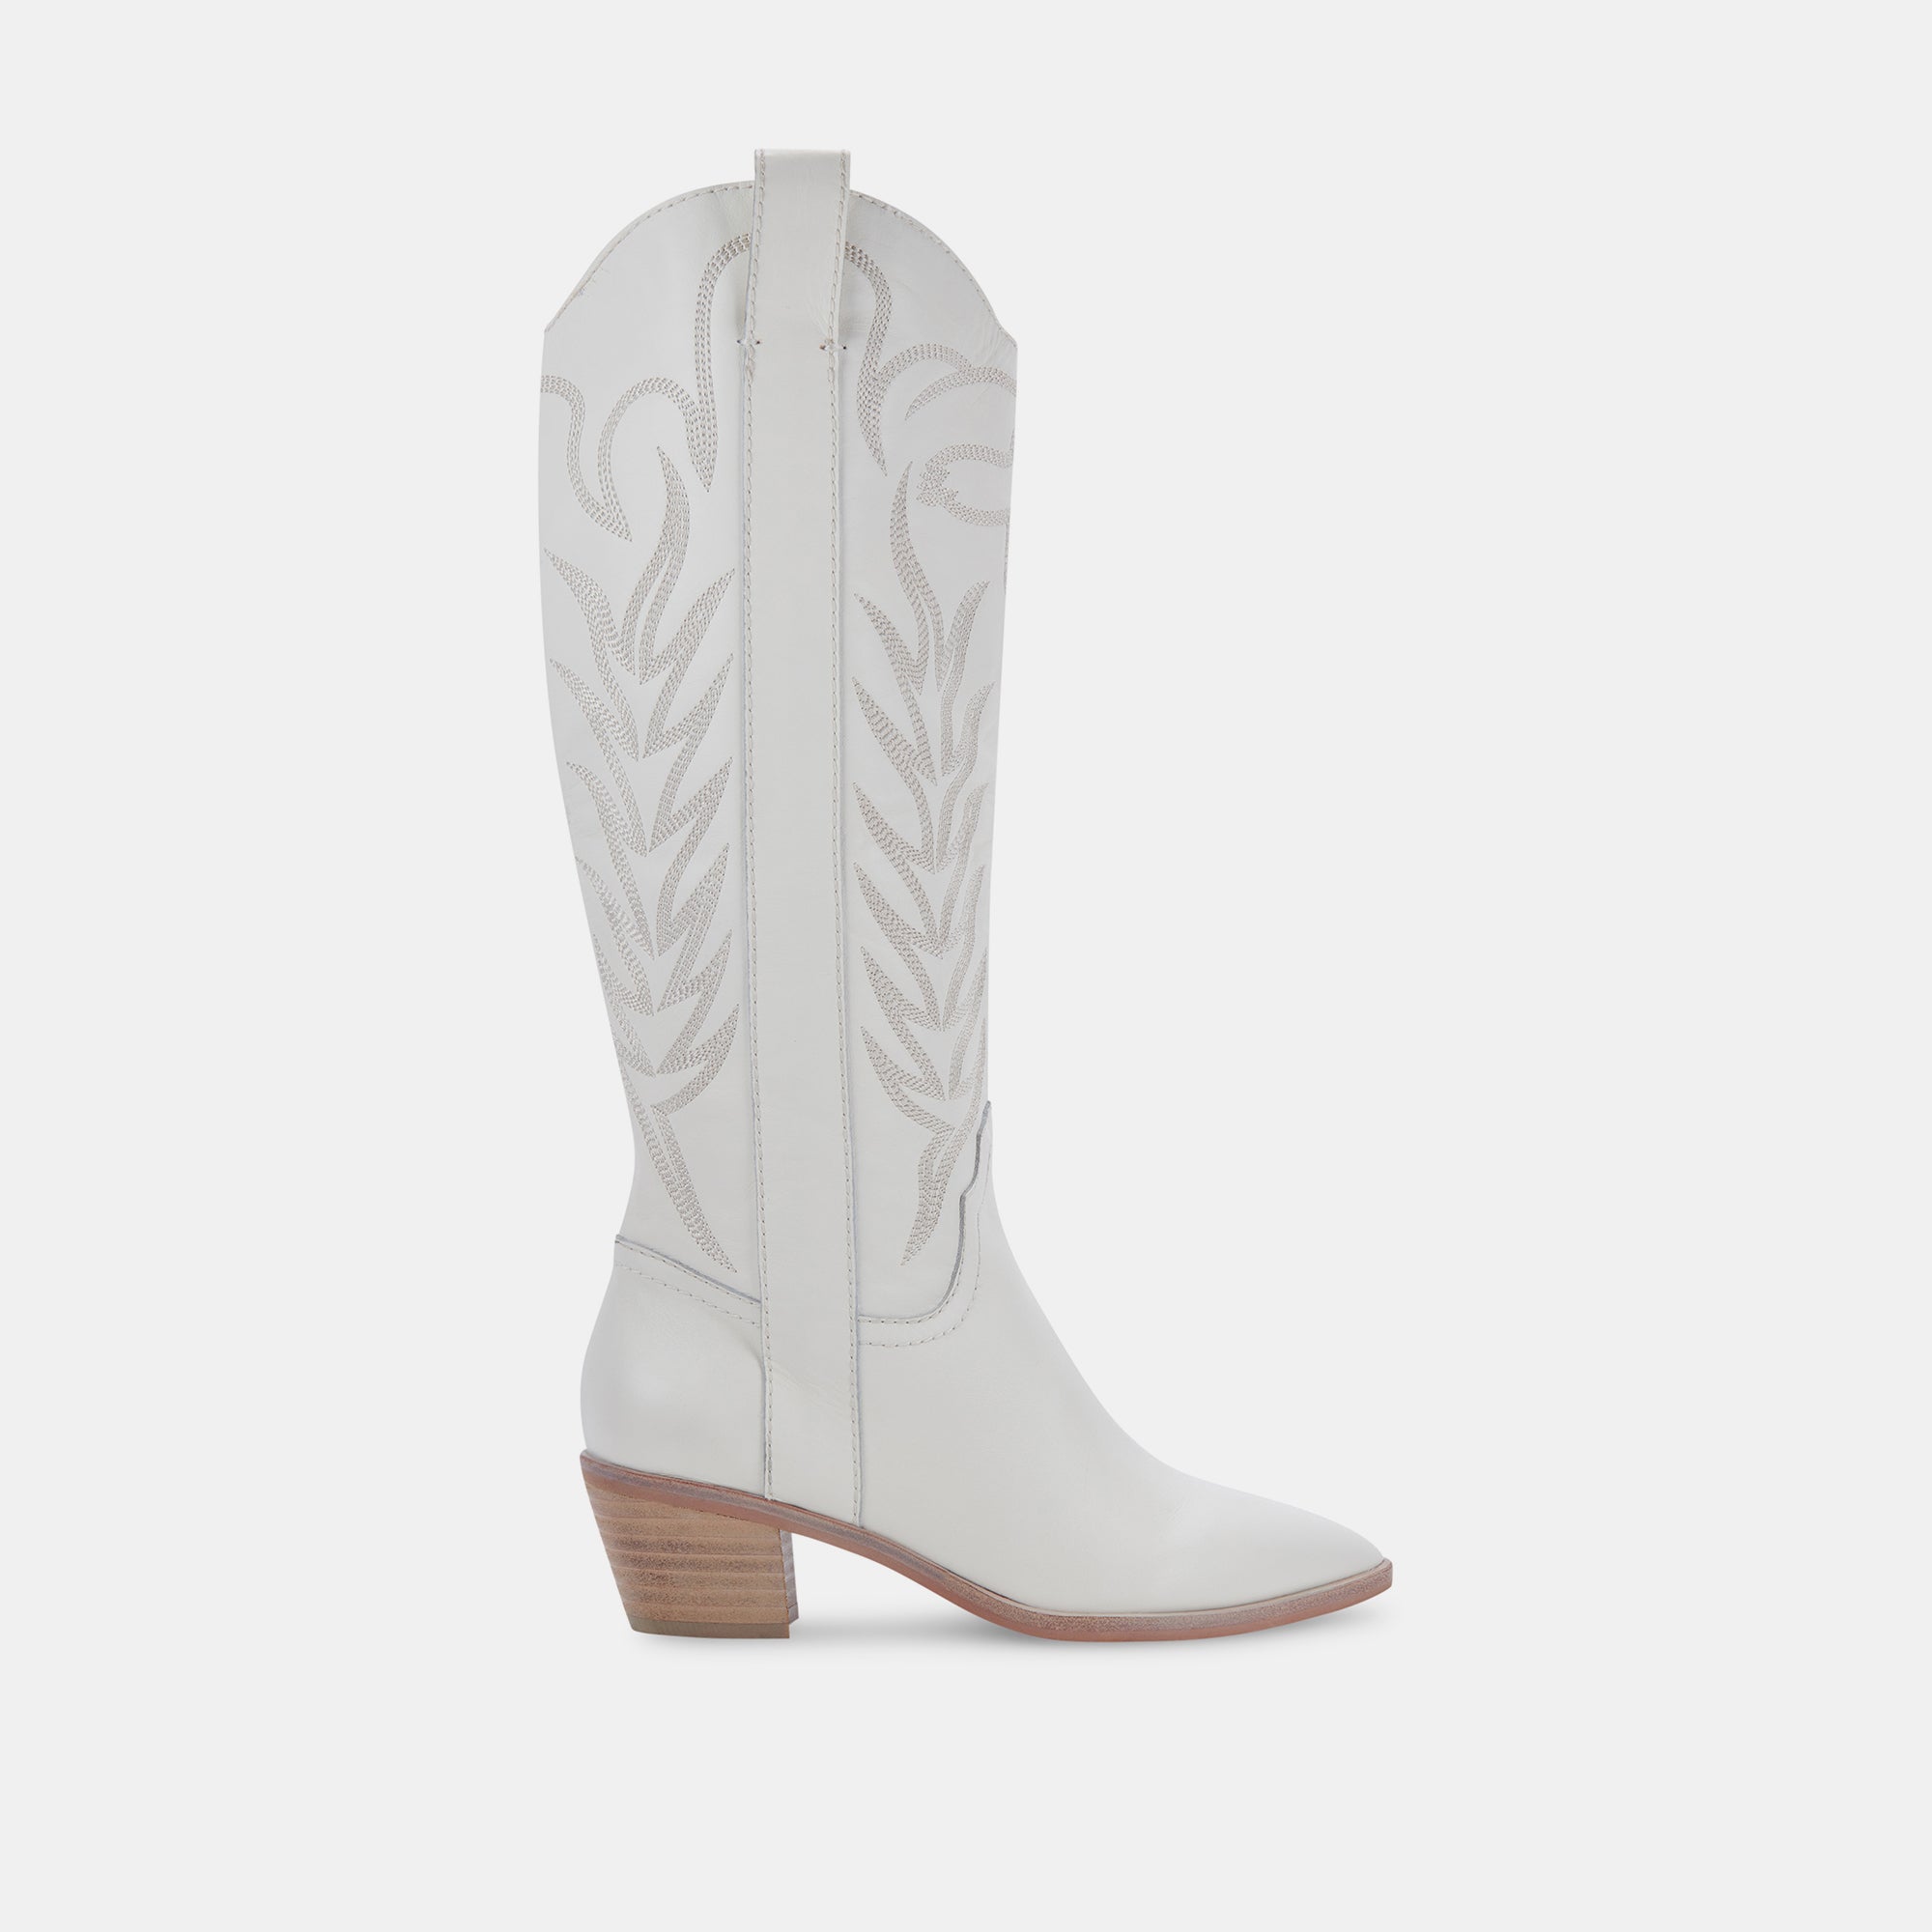 SOLEI Boots White Leather  White Leather Cowboy Boots – Dolce Vita